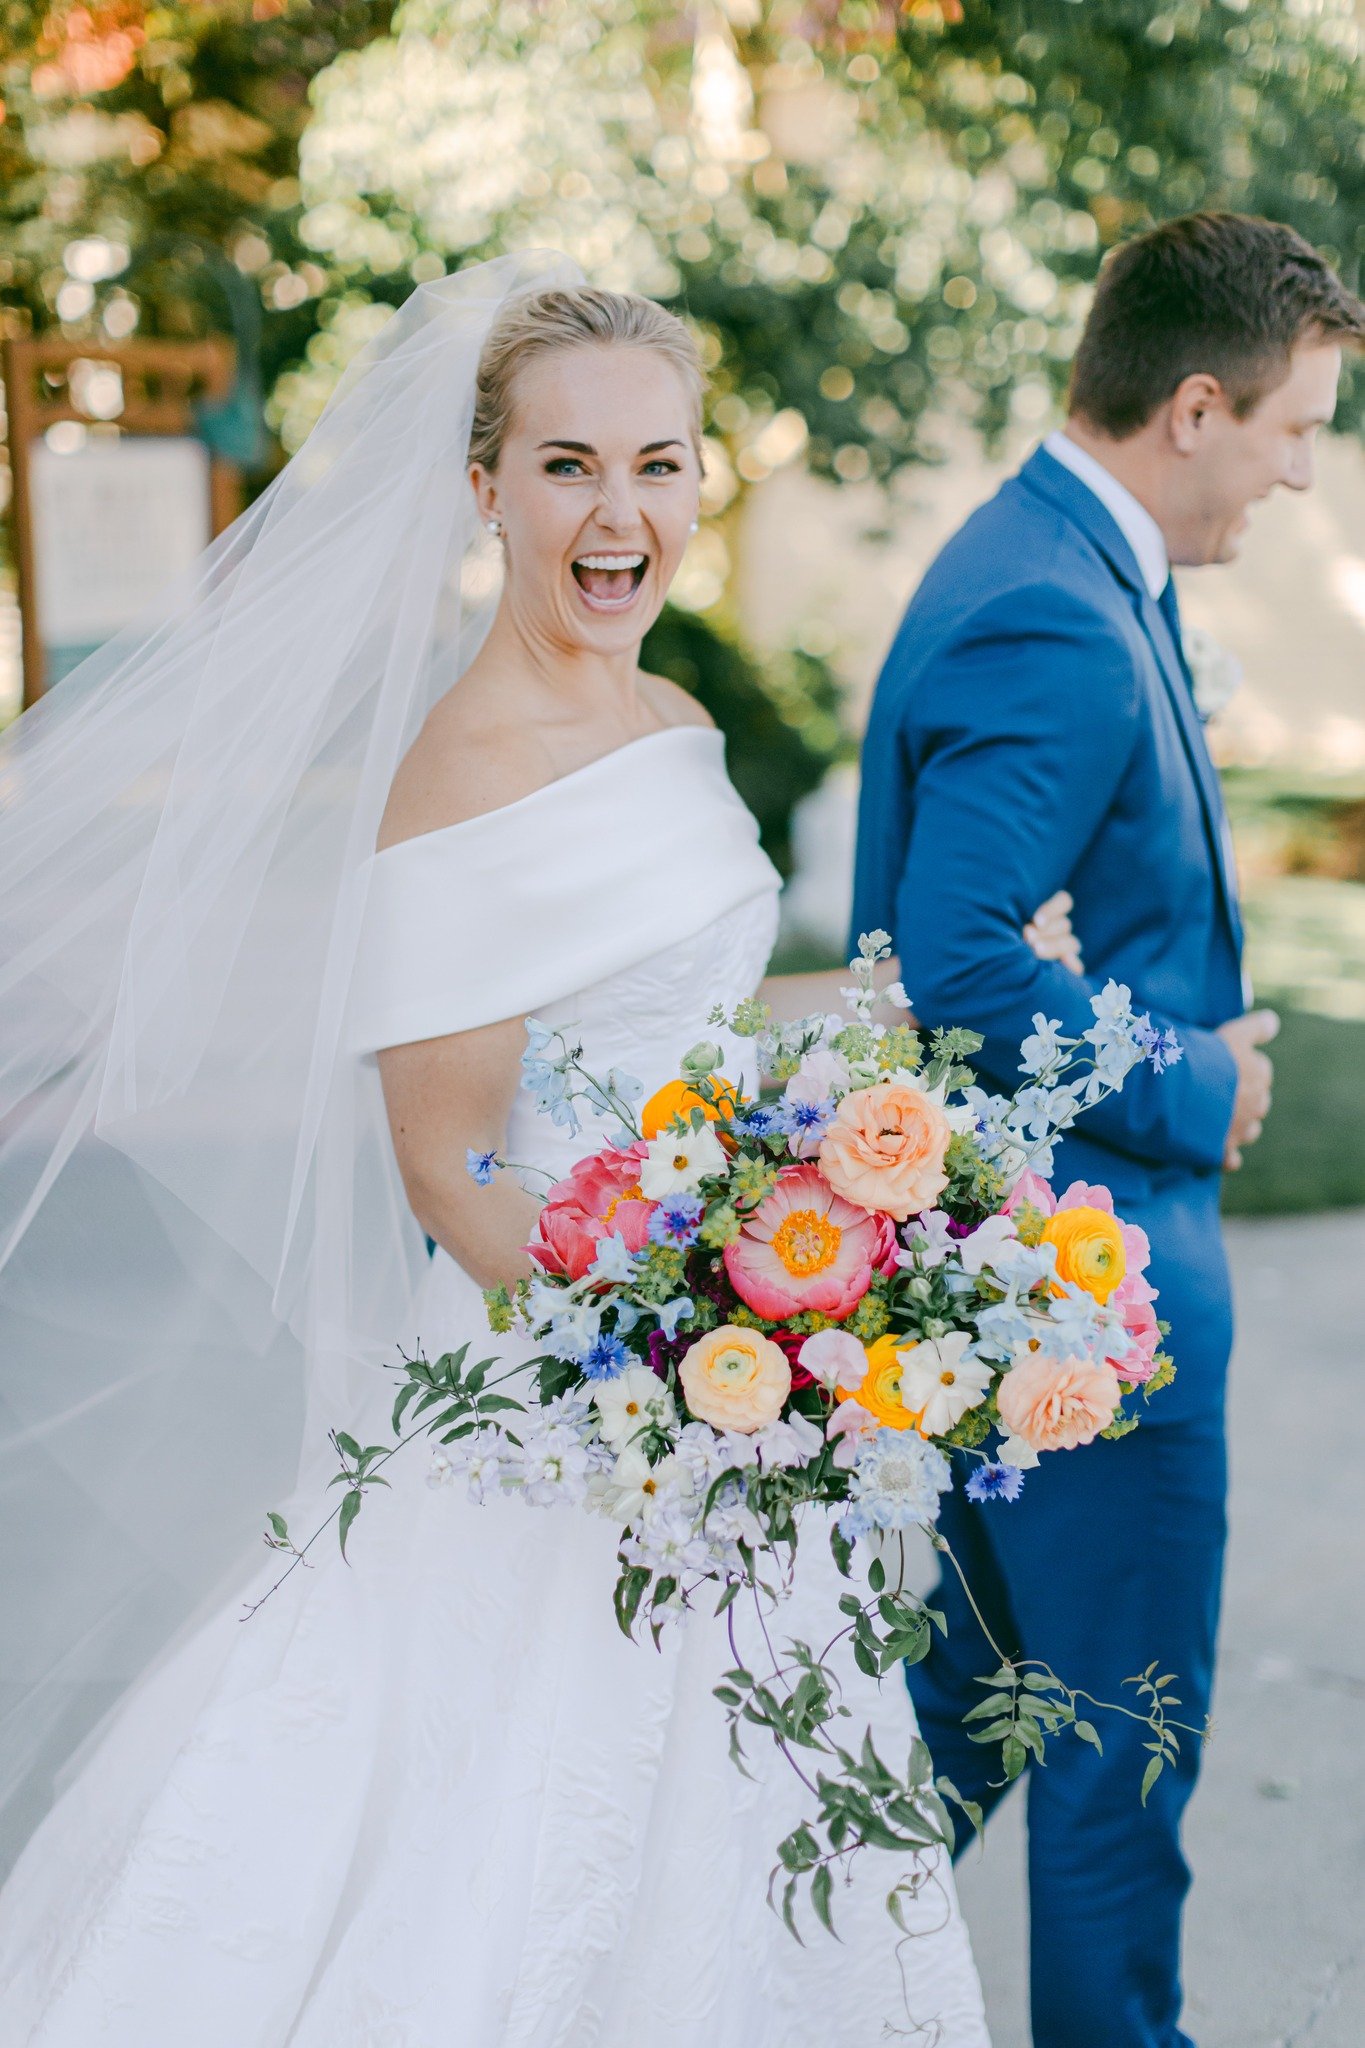 Planning your big day? Don't forget the bloomin' essentials! Elevate your wedding with a sprinkle of floral magic from Garden of Eden. From romantic roses to vibrant tulips, let's turn your dream day into a flower-filled fairytale!

📸 @laurafoote
✨ 